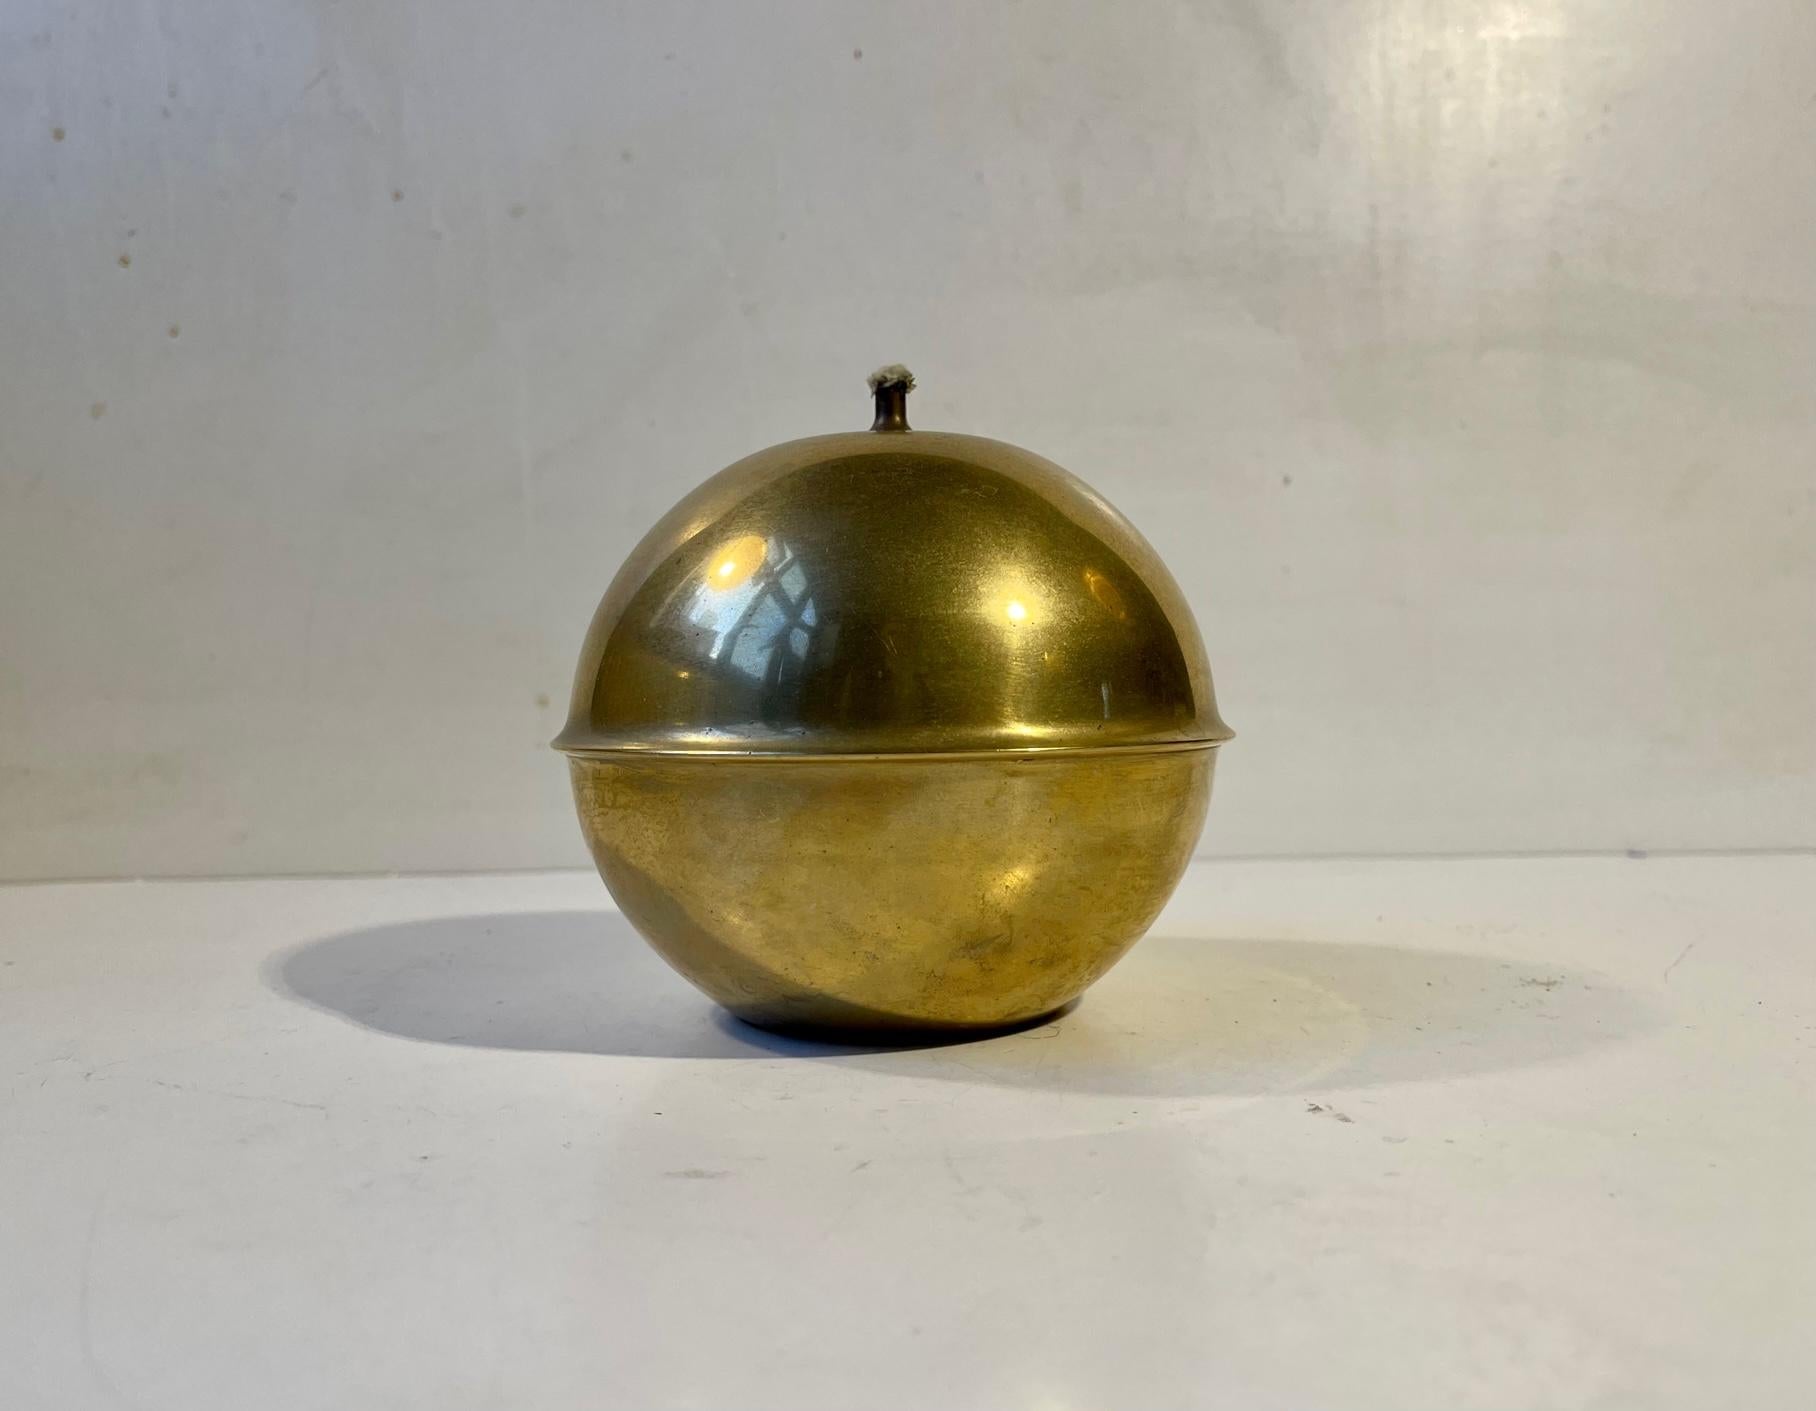 A spherical oil lamp in brass. Commonly called a Planet Light here in Denmark. Anonymously made in Denmark circa 1960-70 in a style reminiscent of Henning Koppel and Hans Agne Jakobsson. Measurements: H: 13 cm, Diameter: 13 cm.